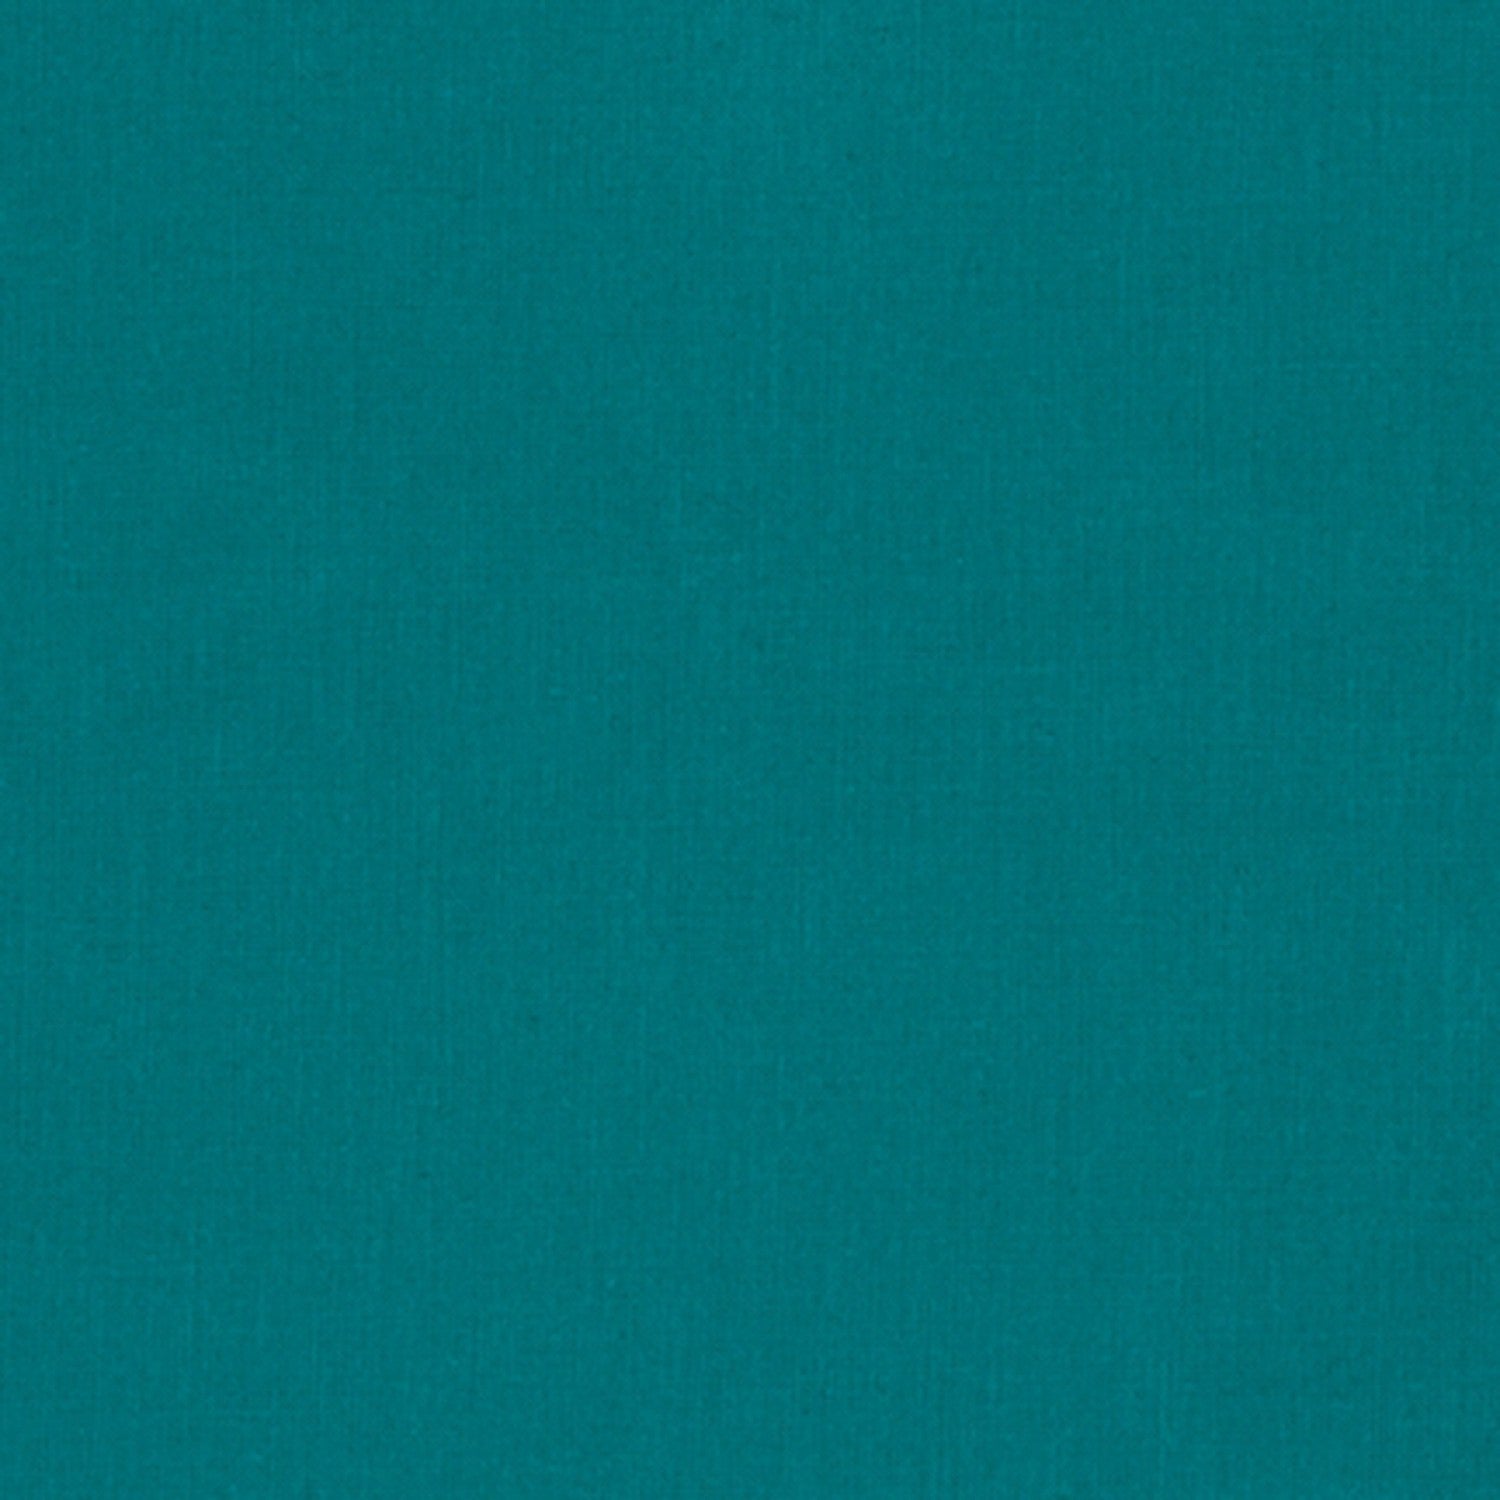 Kona Cotton Solids Emerald fabric thumbnail image for true color reference